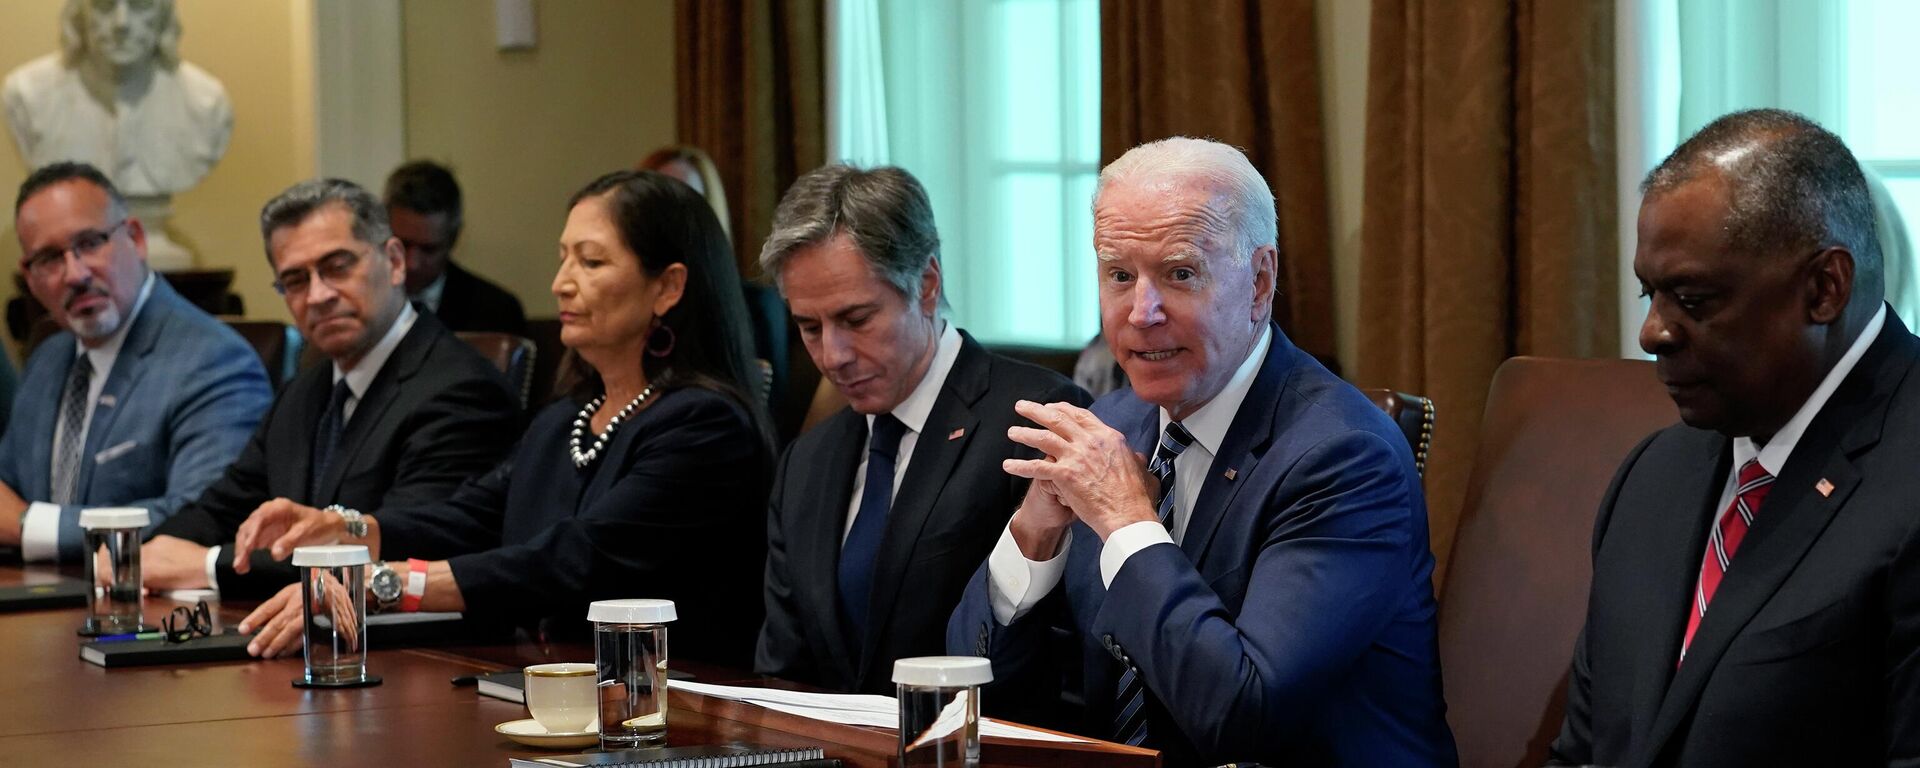 President Joe Biden speaks during a meeting with his Cabinet in the Cabinet Room at the White House in Washington, Tuesday, July 20, 2021. From left, Secretary of Education Miguel Cardona, Secretary of Health and Human Services Xavier Becerra, Secretary of the Interior Deb Haaland, Secretary of State Antony Blinken, Biden and Secretary of Defense Lloyd Austin. (AP Photo/Susan Walsh) - Sputnik International, 1920, 16.06.2022